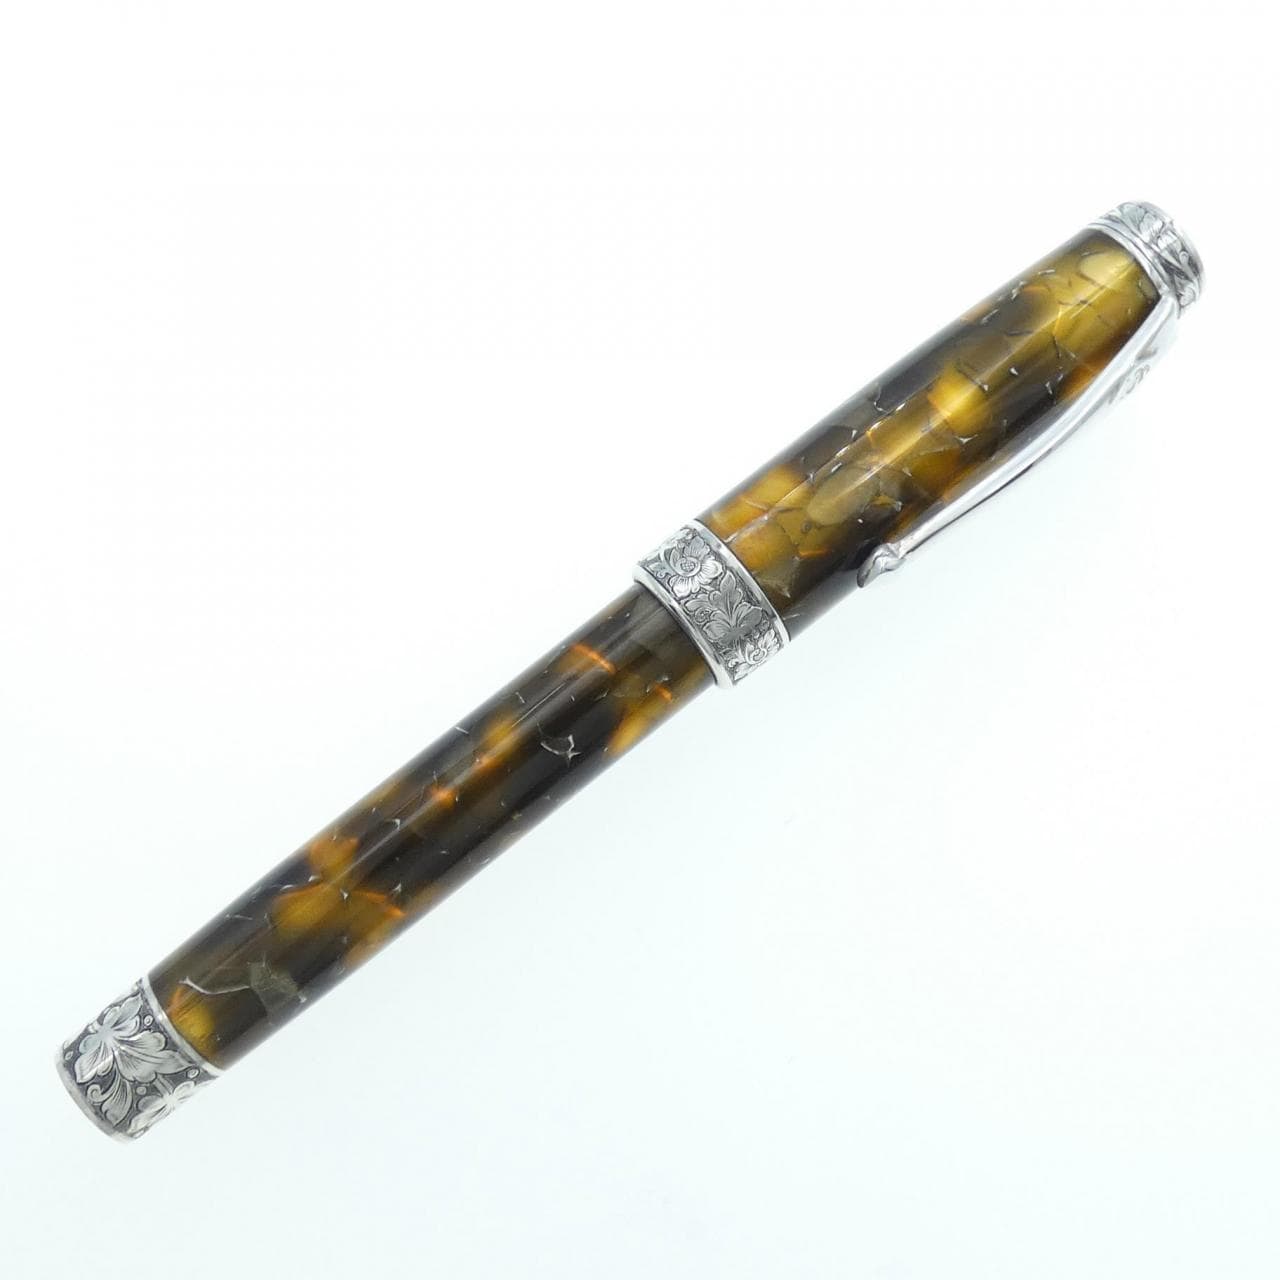 Conway Stewart Sandringham Limited Edition Fountain Pen